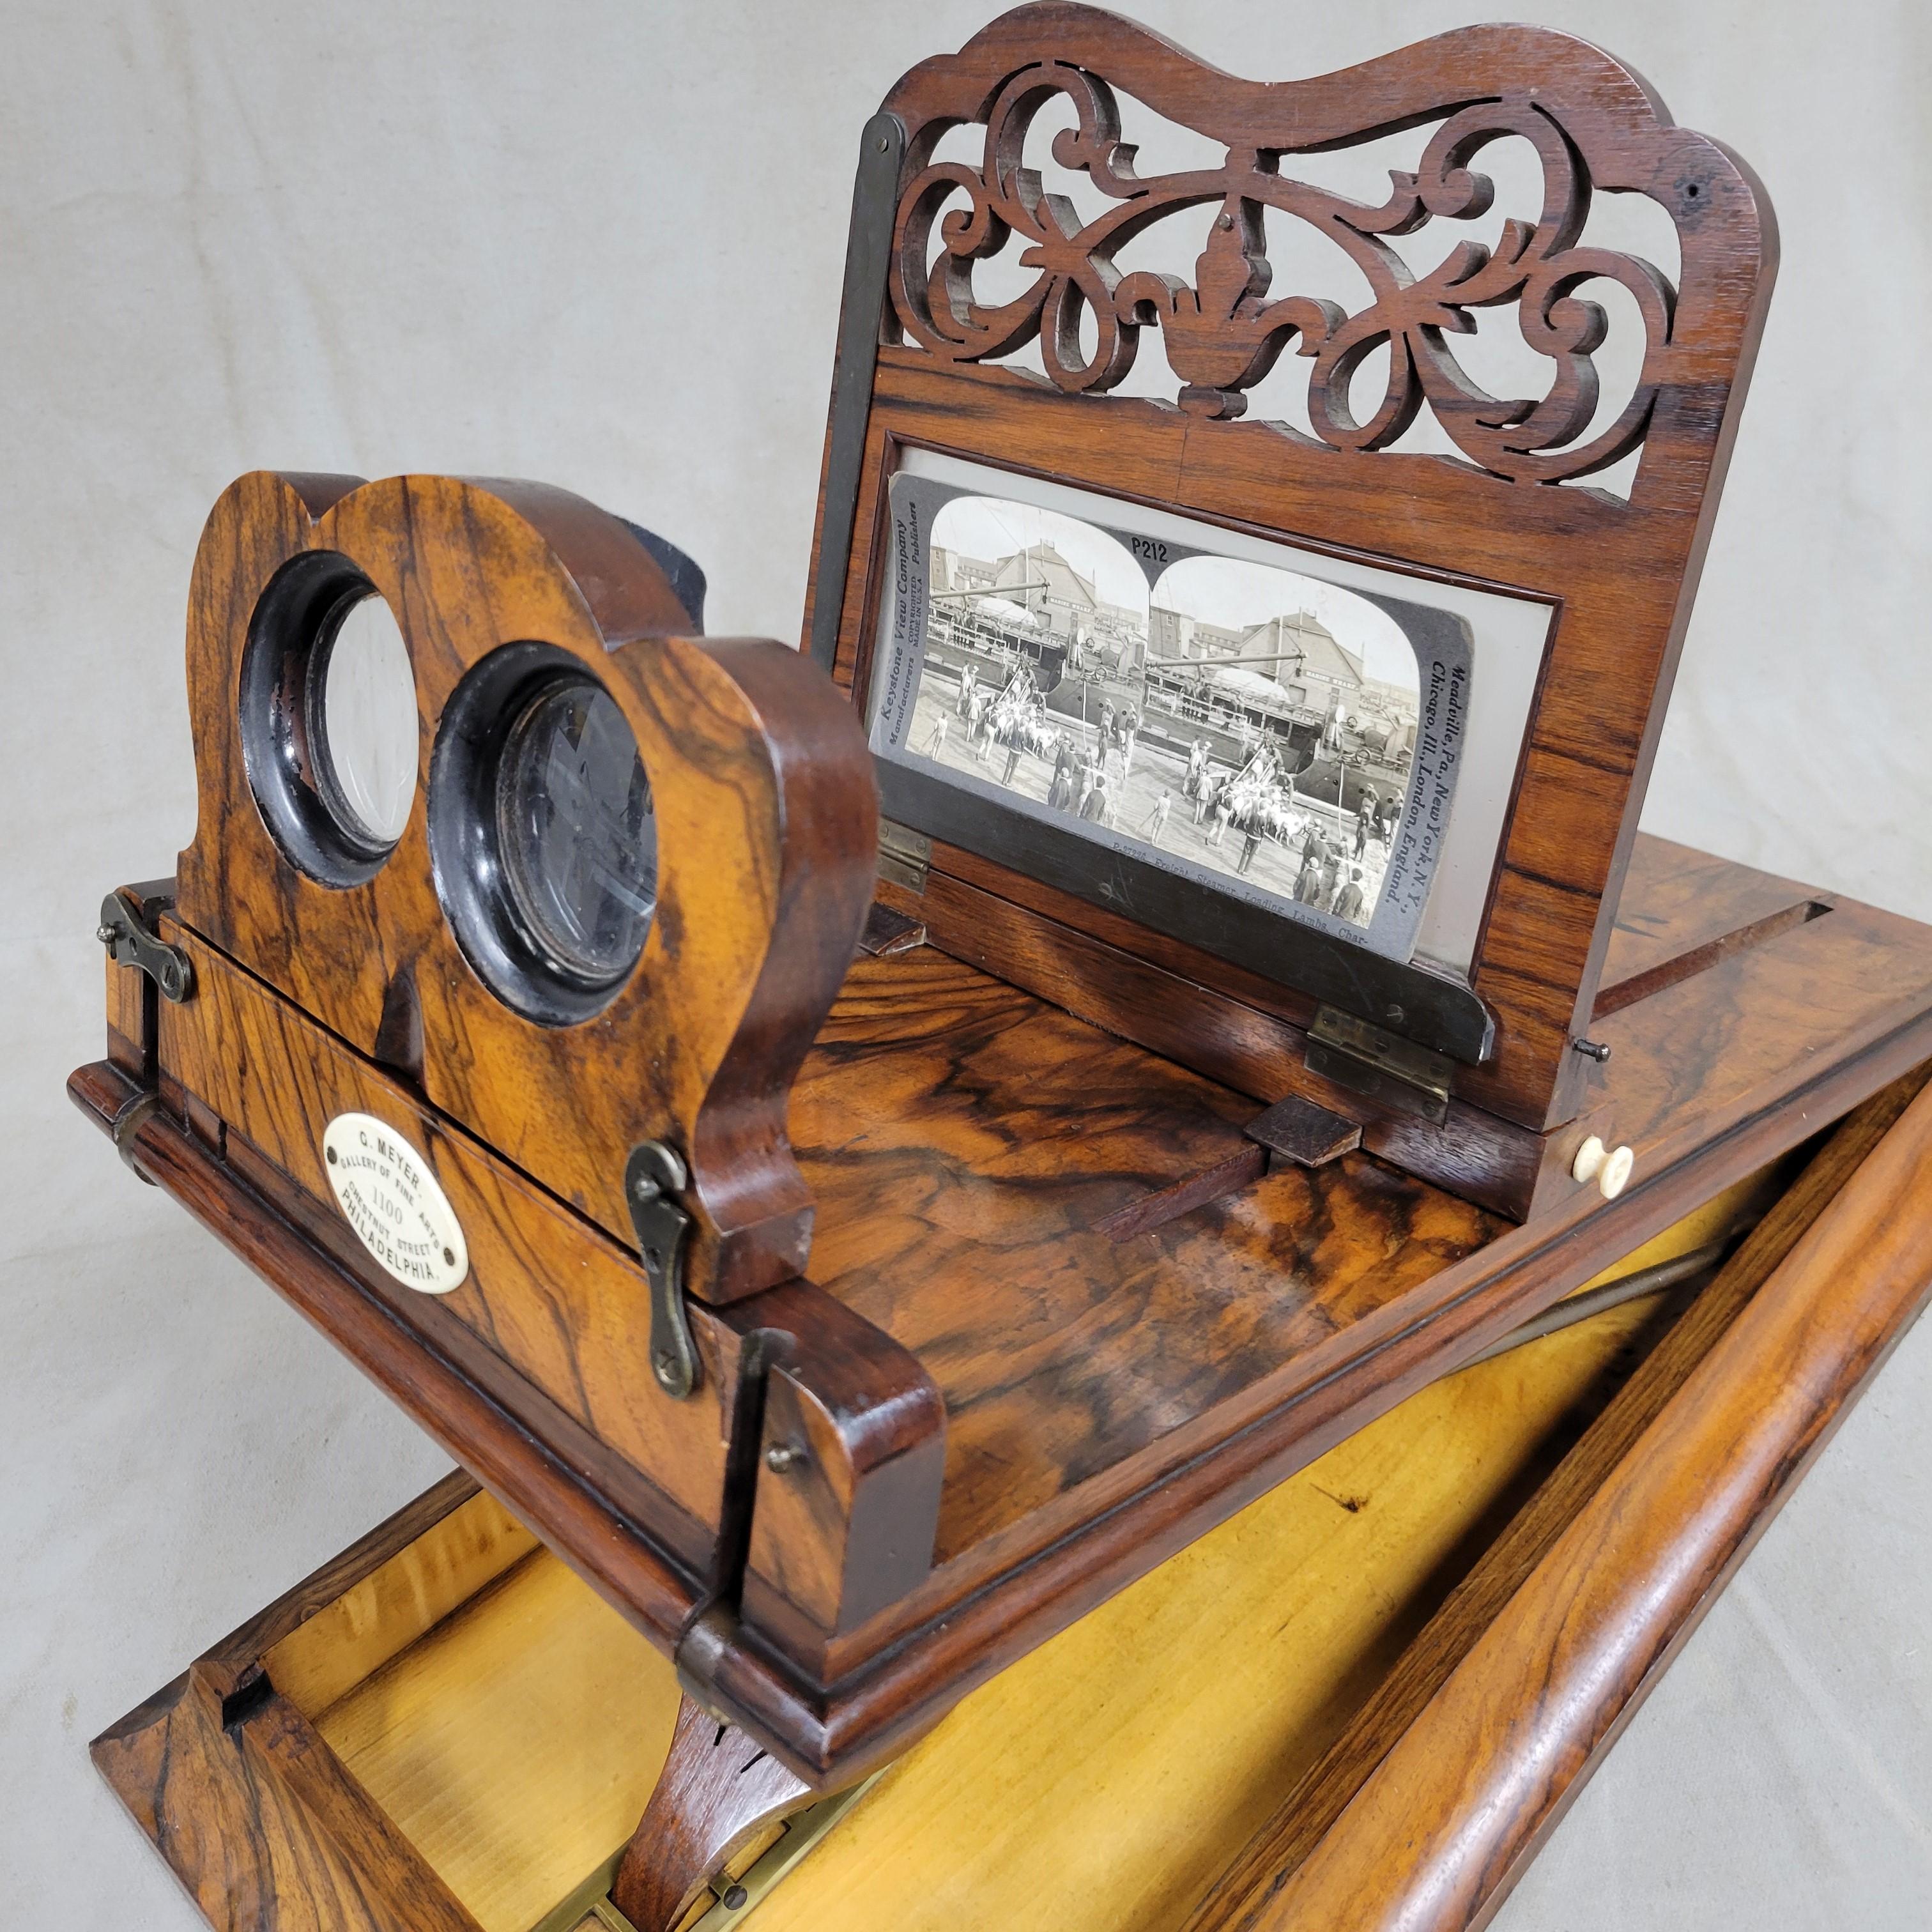 This stunning and highly unusual folding stereoscope viewer was crafted out of rosewood and brass in the Victorian style of the late 1800s. The plaque attached to the eyepiece is inscribed, 